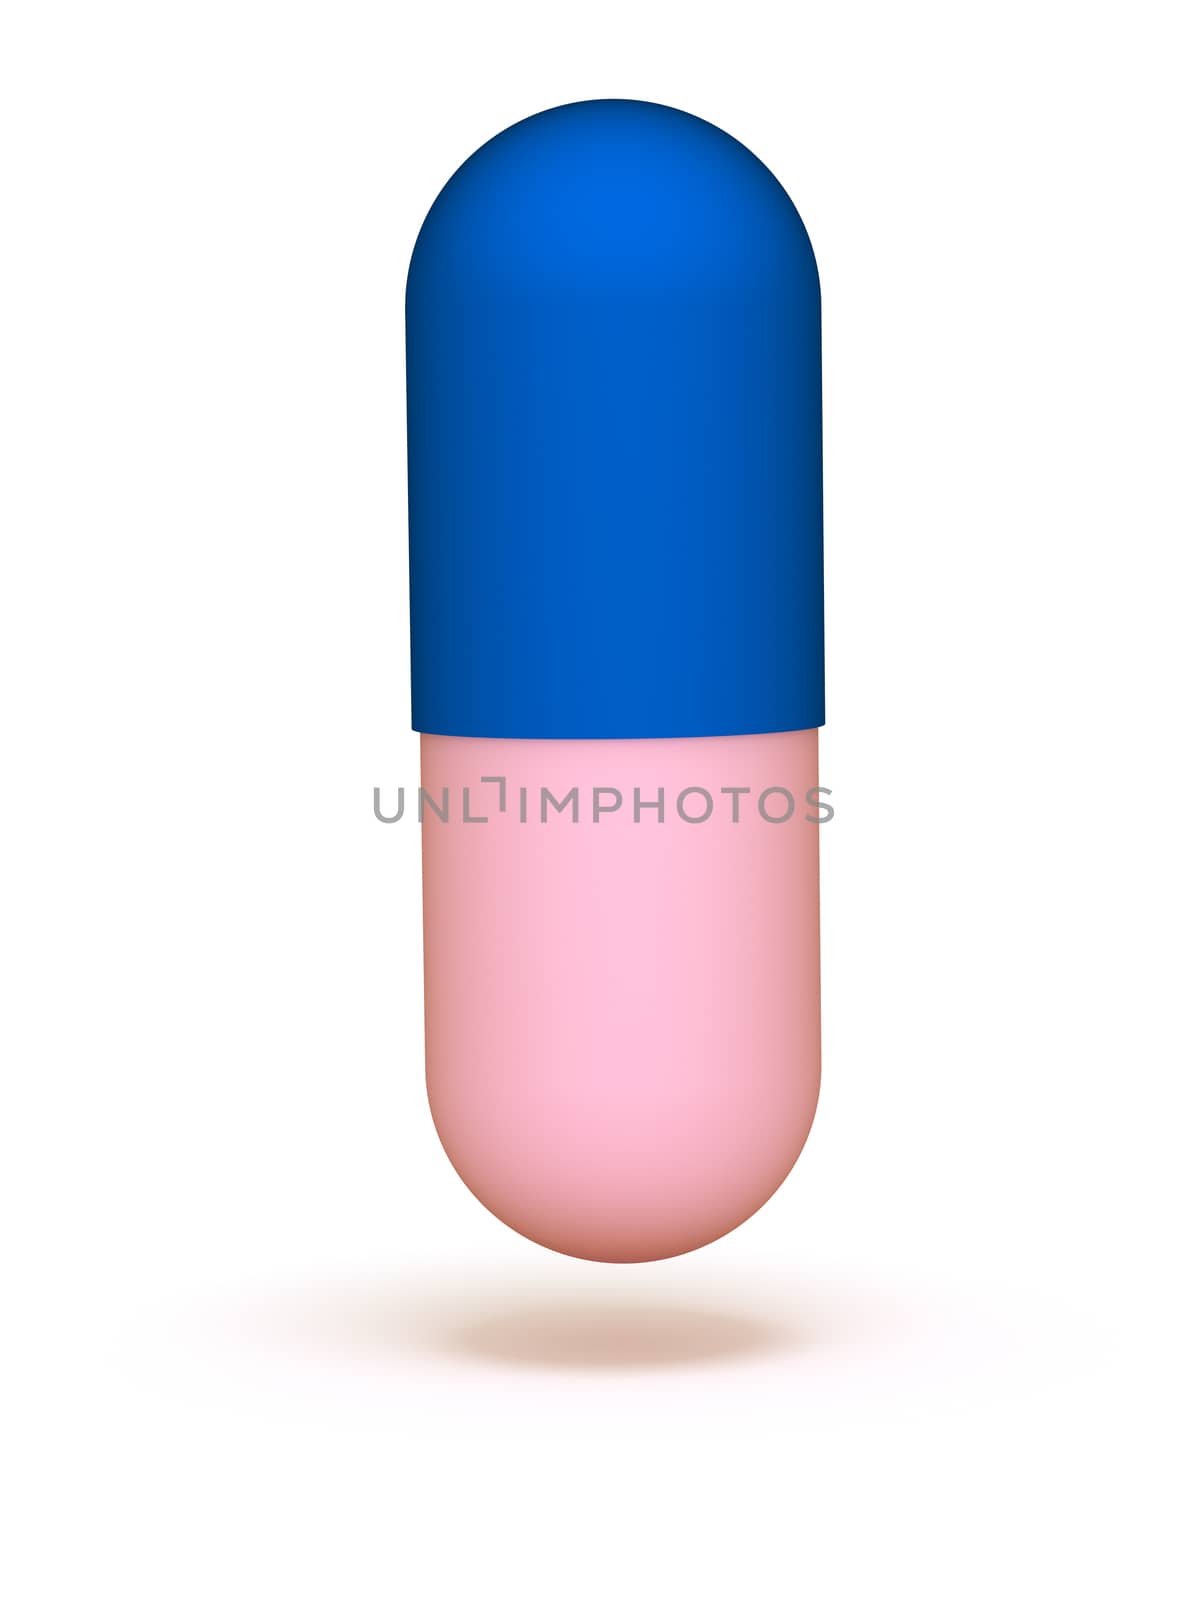 Medicine concept. Pill isolated on white background